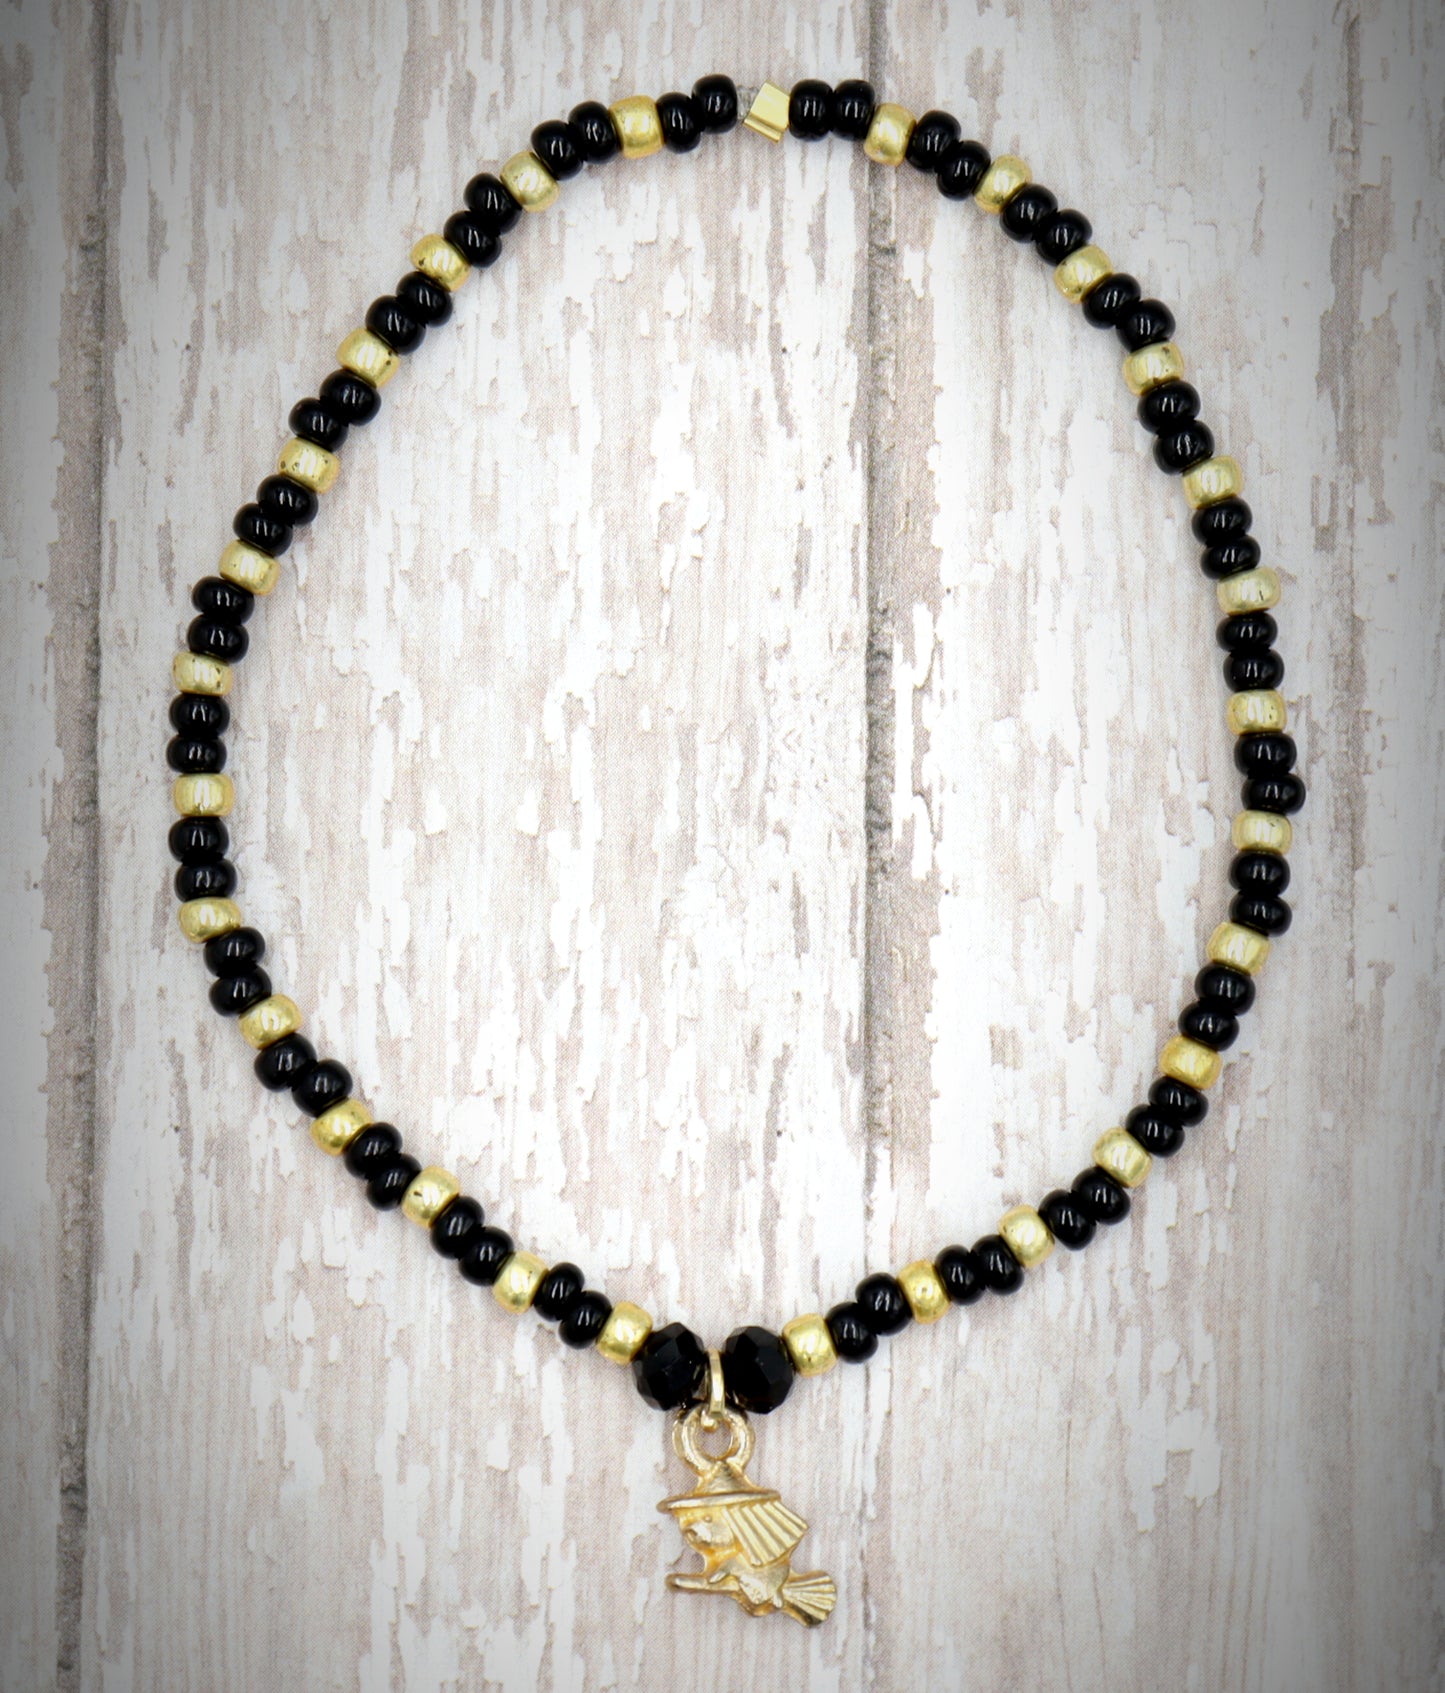 Little Wicked Witch Flying on a Broom Black and Gold Halloween Stretch Bracelet by Monkey's Mojo